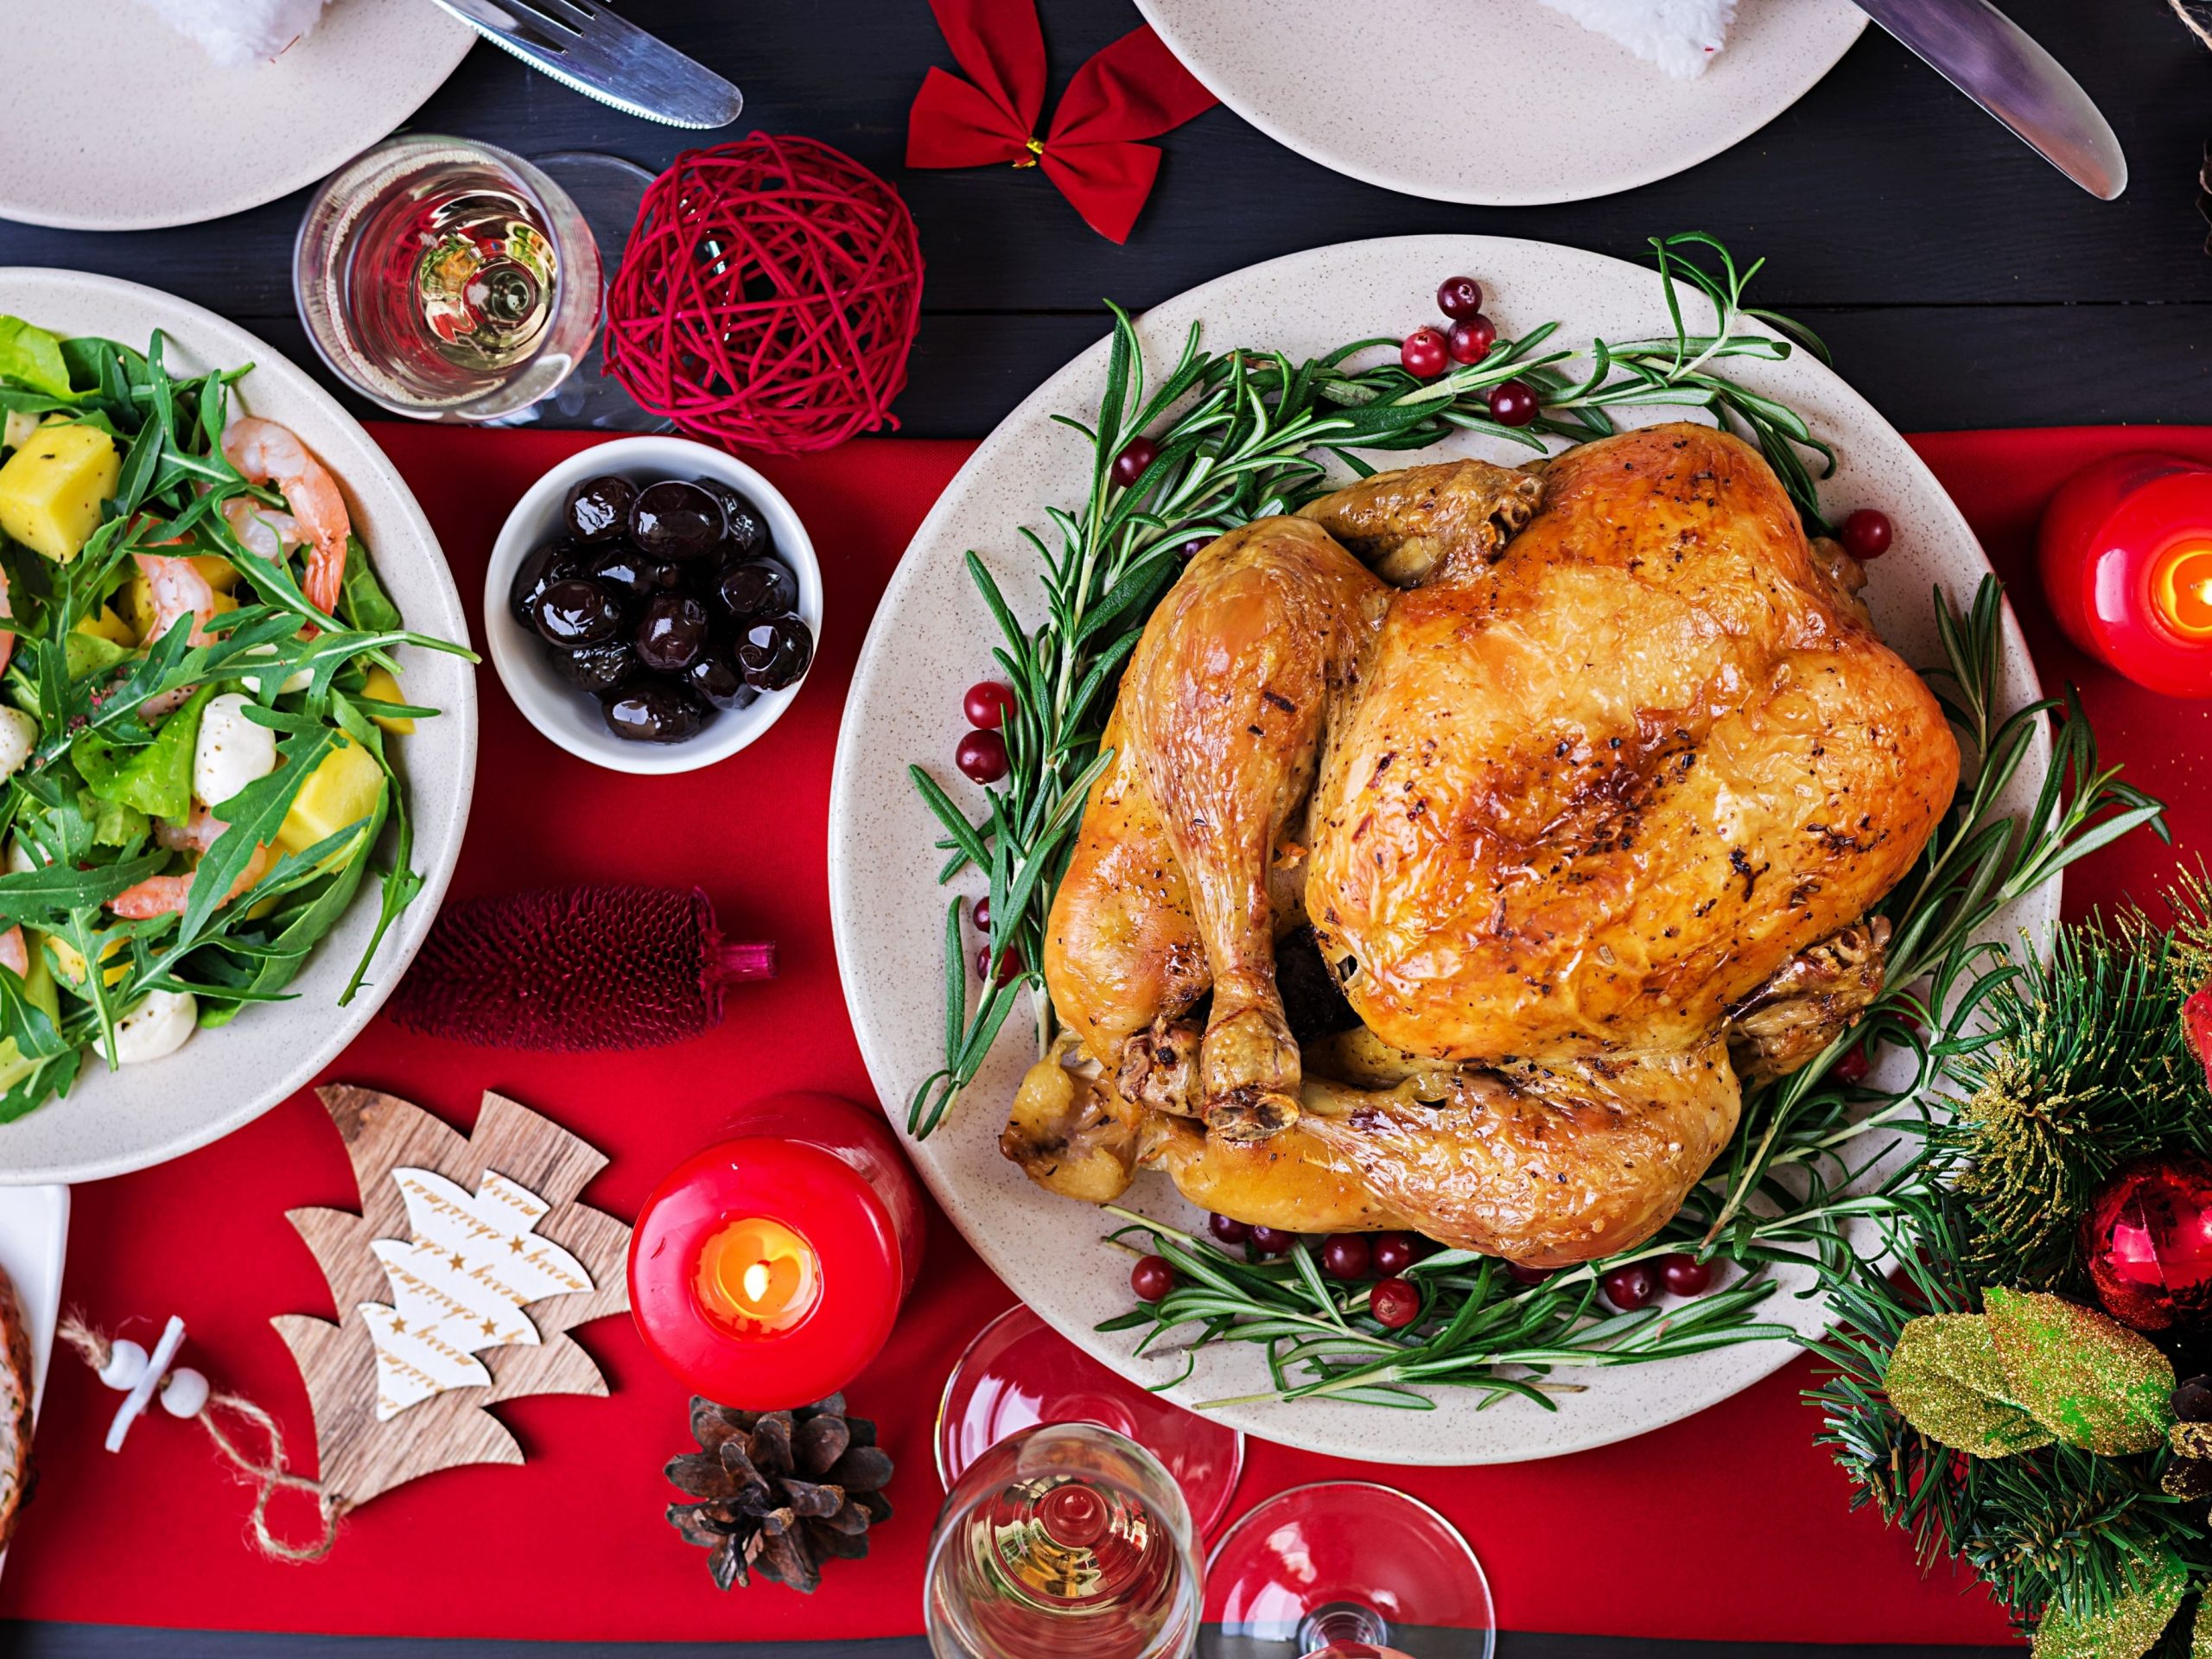 How to prepare a healthy Christmas DinnerA few things to consider